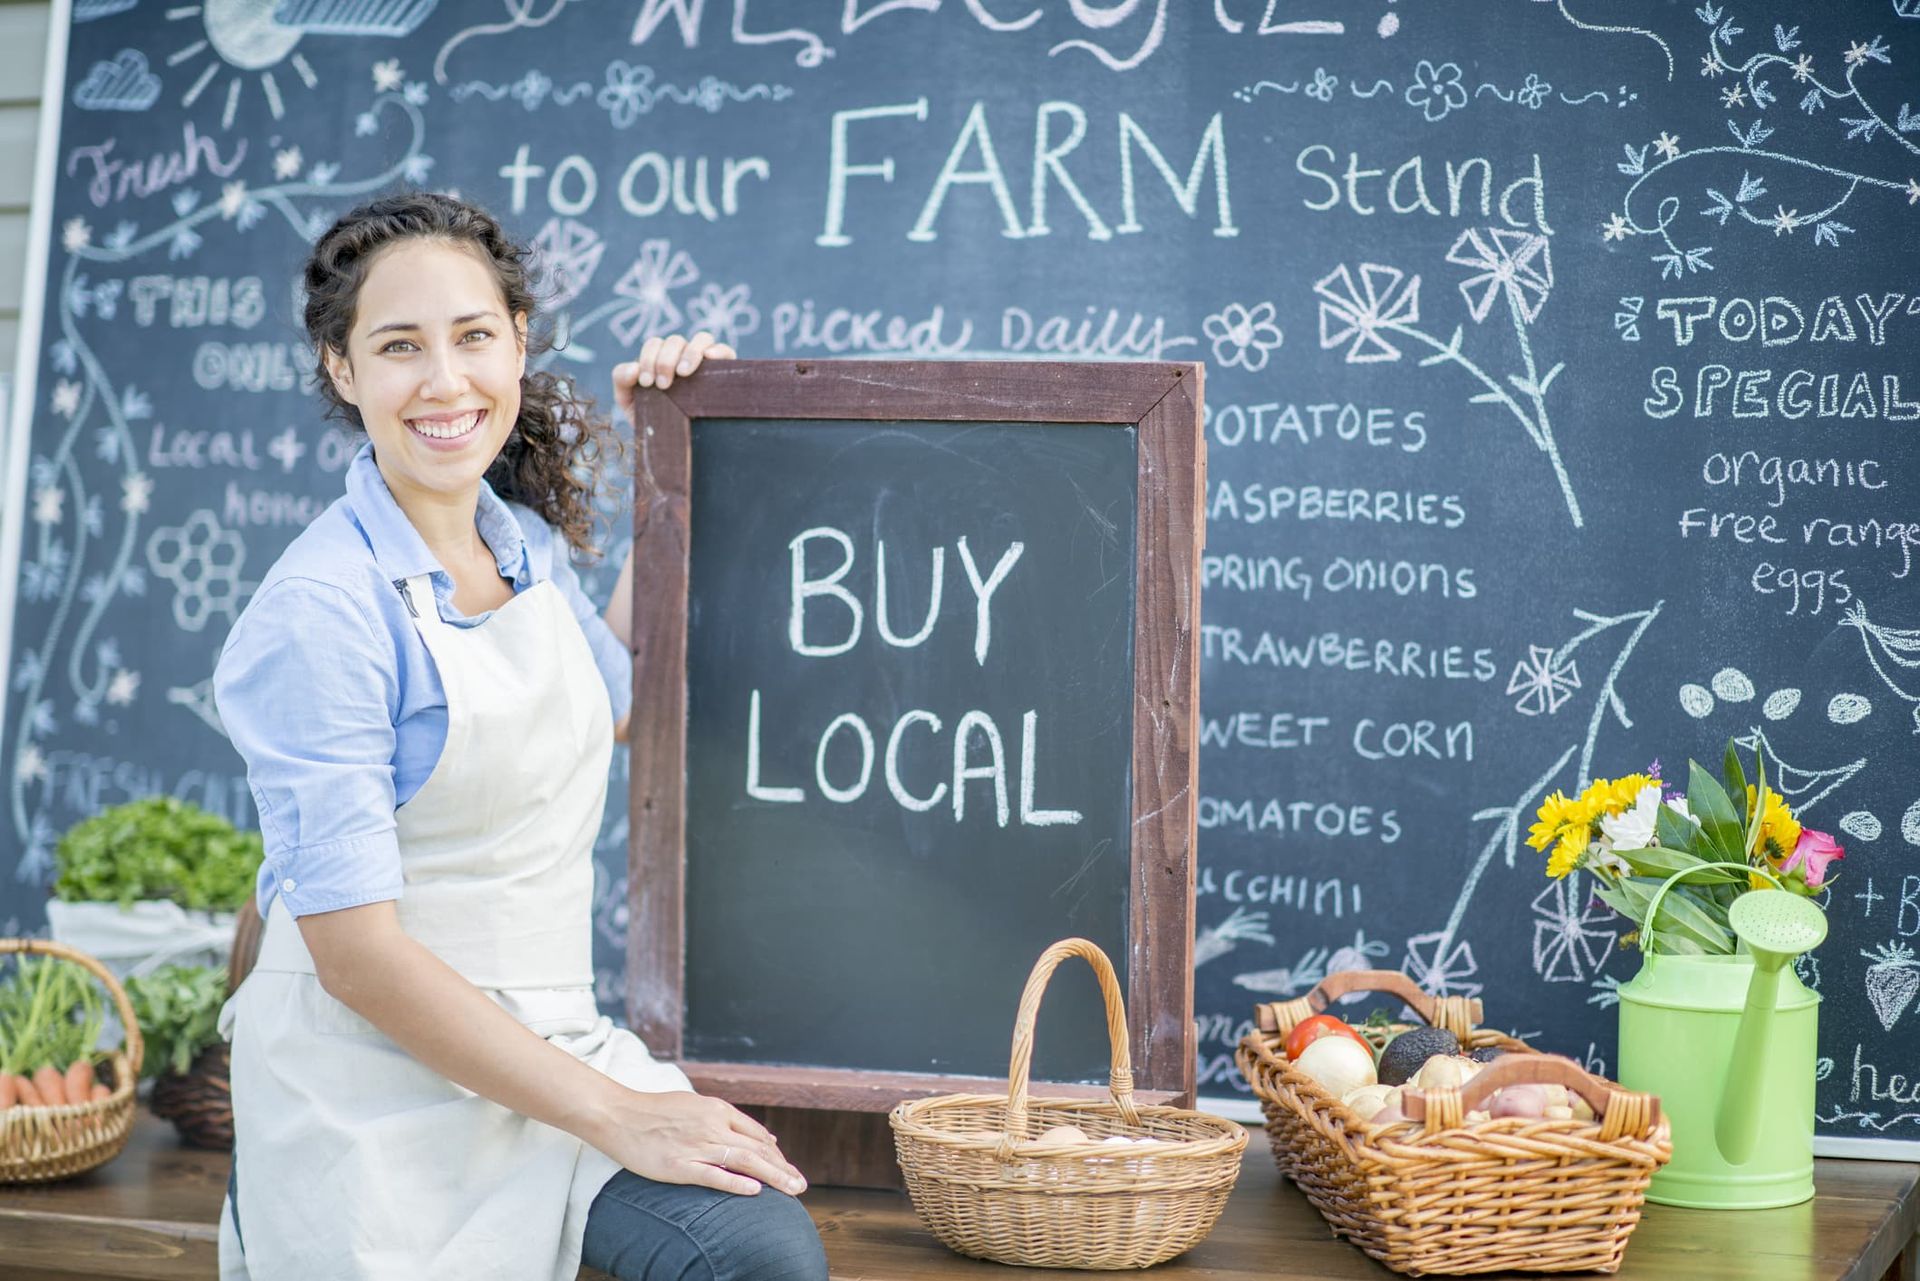 A woman is standing in front of a chalkboard holding a sign that says `` buy local ''.